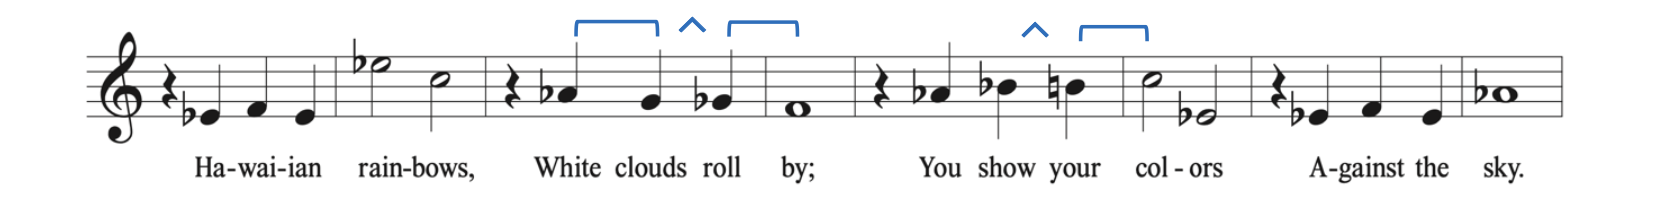 Examples of half steps and whole steps in "Hawaiian Rainbows." In measure 3, there is a diatonic half step from A-flat to G and a chromatic half step from G to G-flat. Across the bar line from measures 3 to 4 is a diatonic half step from G-flat to F. In measure 5, there is a chromatic half step from B-flat to B-natural. Across the bar line from measures 5 to 6 is a diatonic half step from B to C.